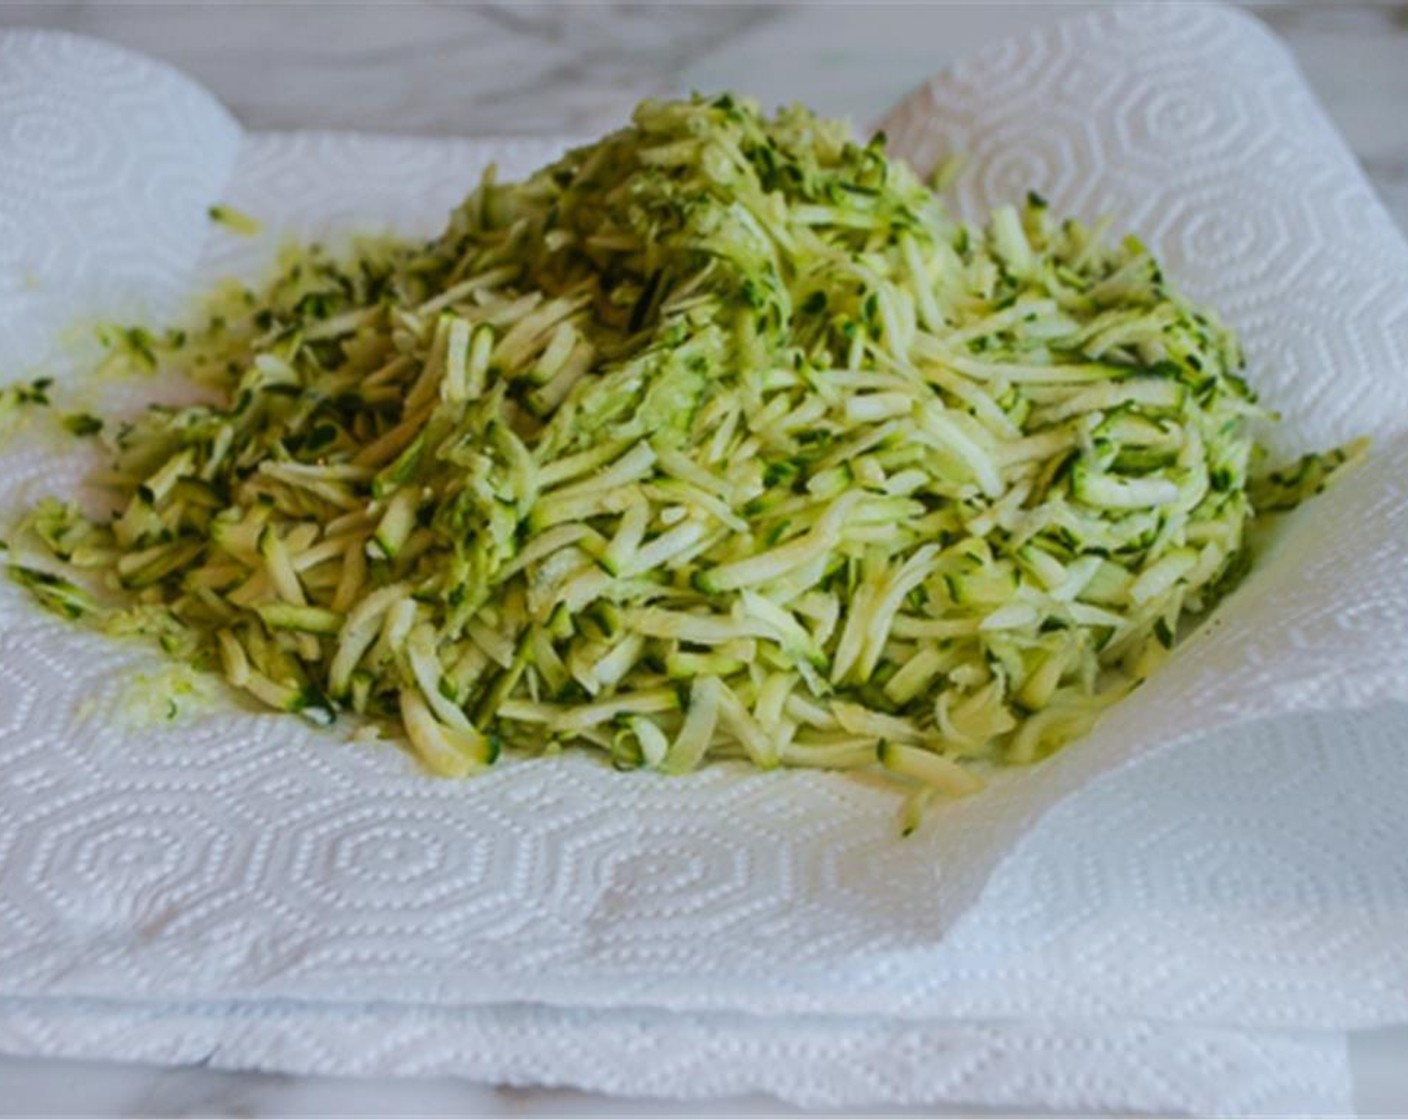 step 2 Using a food processor or box grater, grate the Zucchini (2 3/4 cups). Place the grated zucchini on top of several layers of paper towels and wring dry. If necessary, repeat 1 to 2 times to remove any excess moisture.